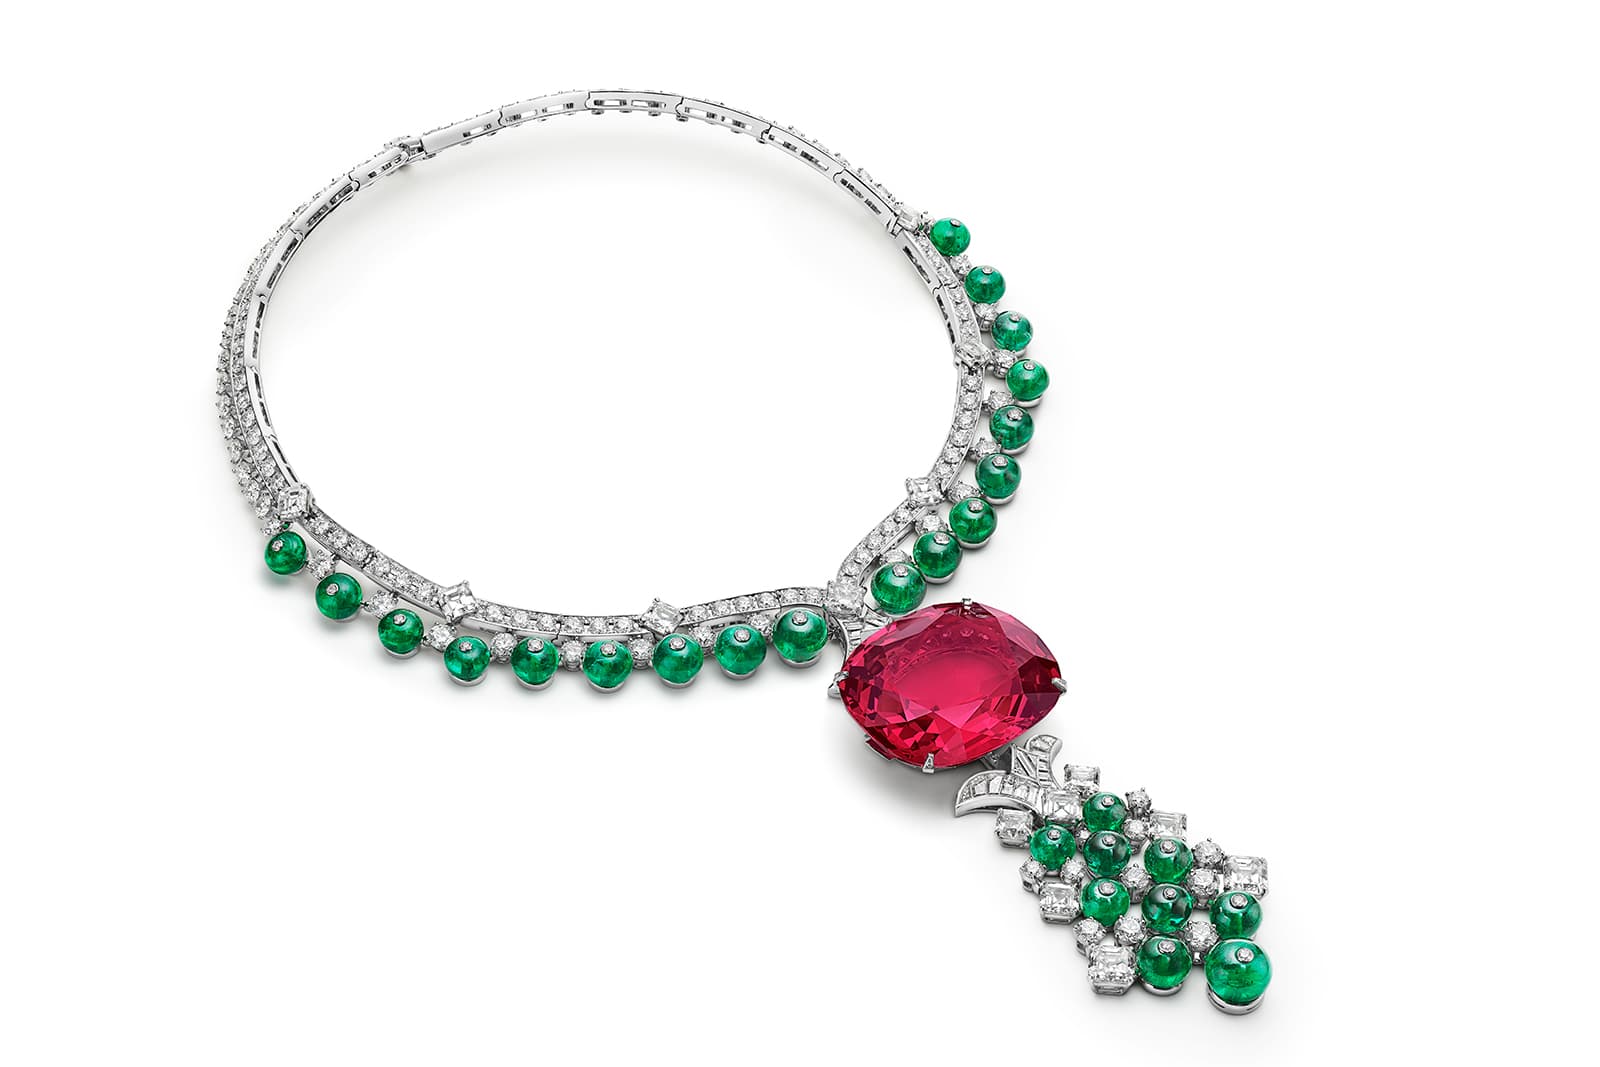 Bulgari Magnifica Imperial Spinel High Jewellery necklace with a 131.24 carat faceted spinel, emerald beads and diamonds